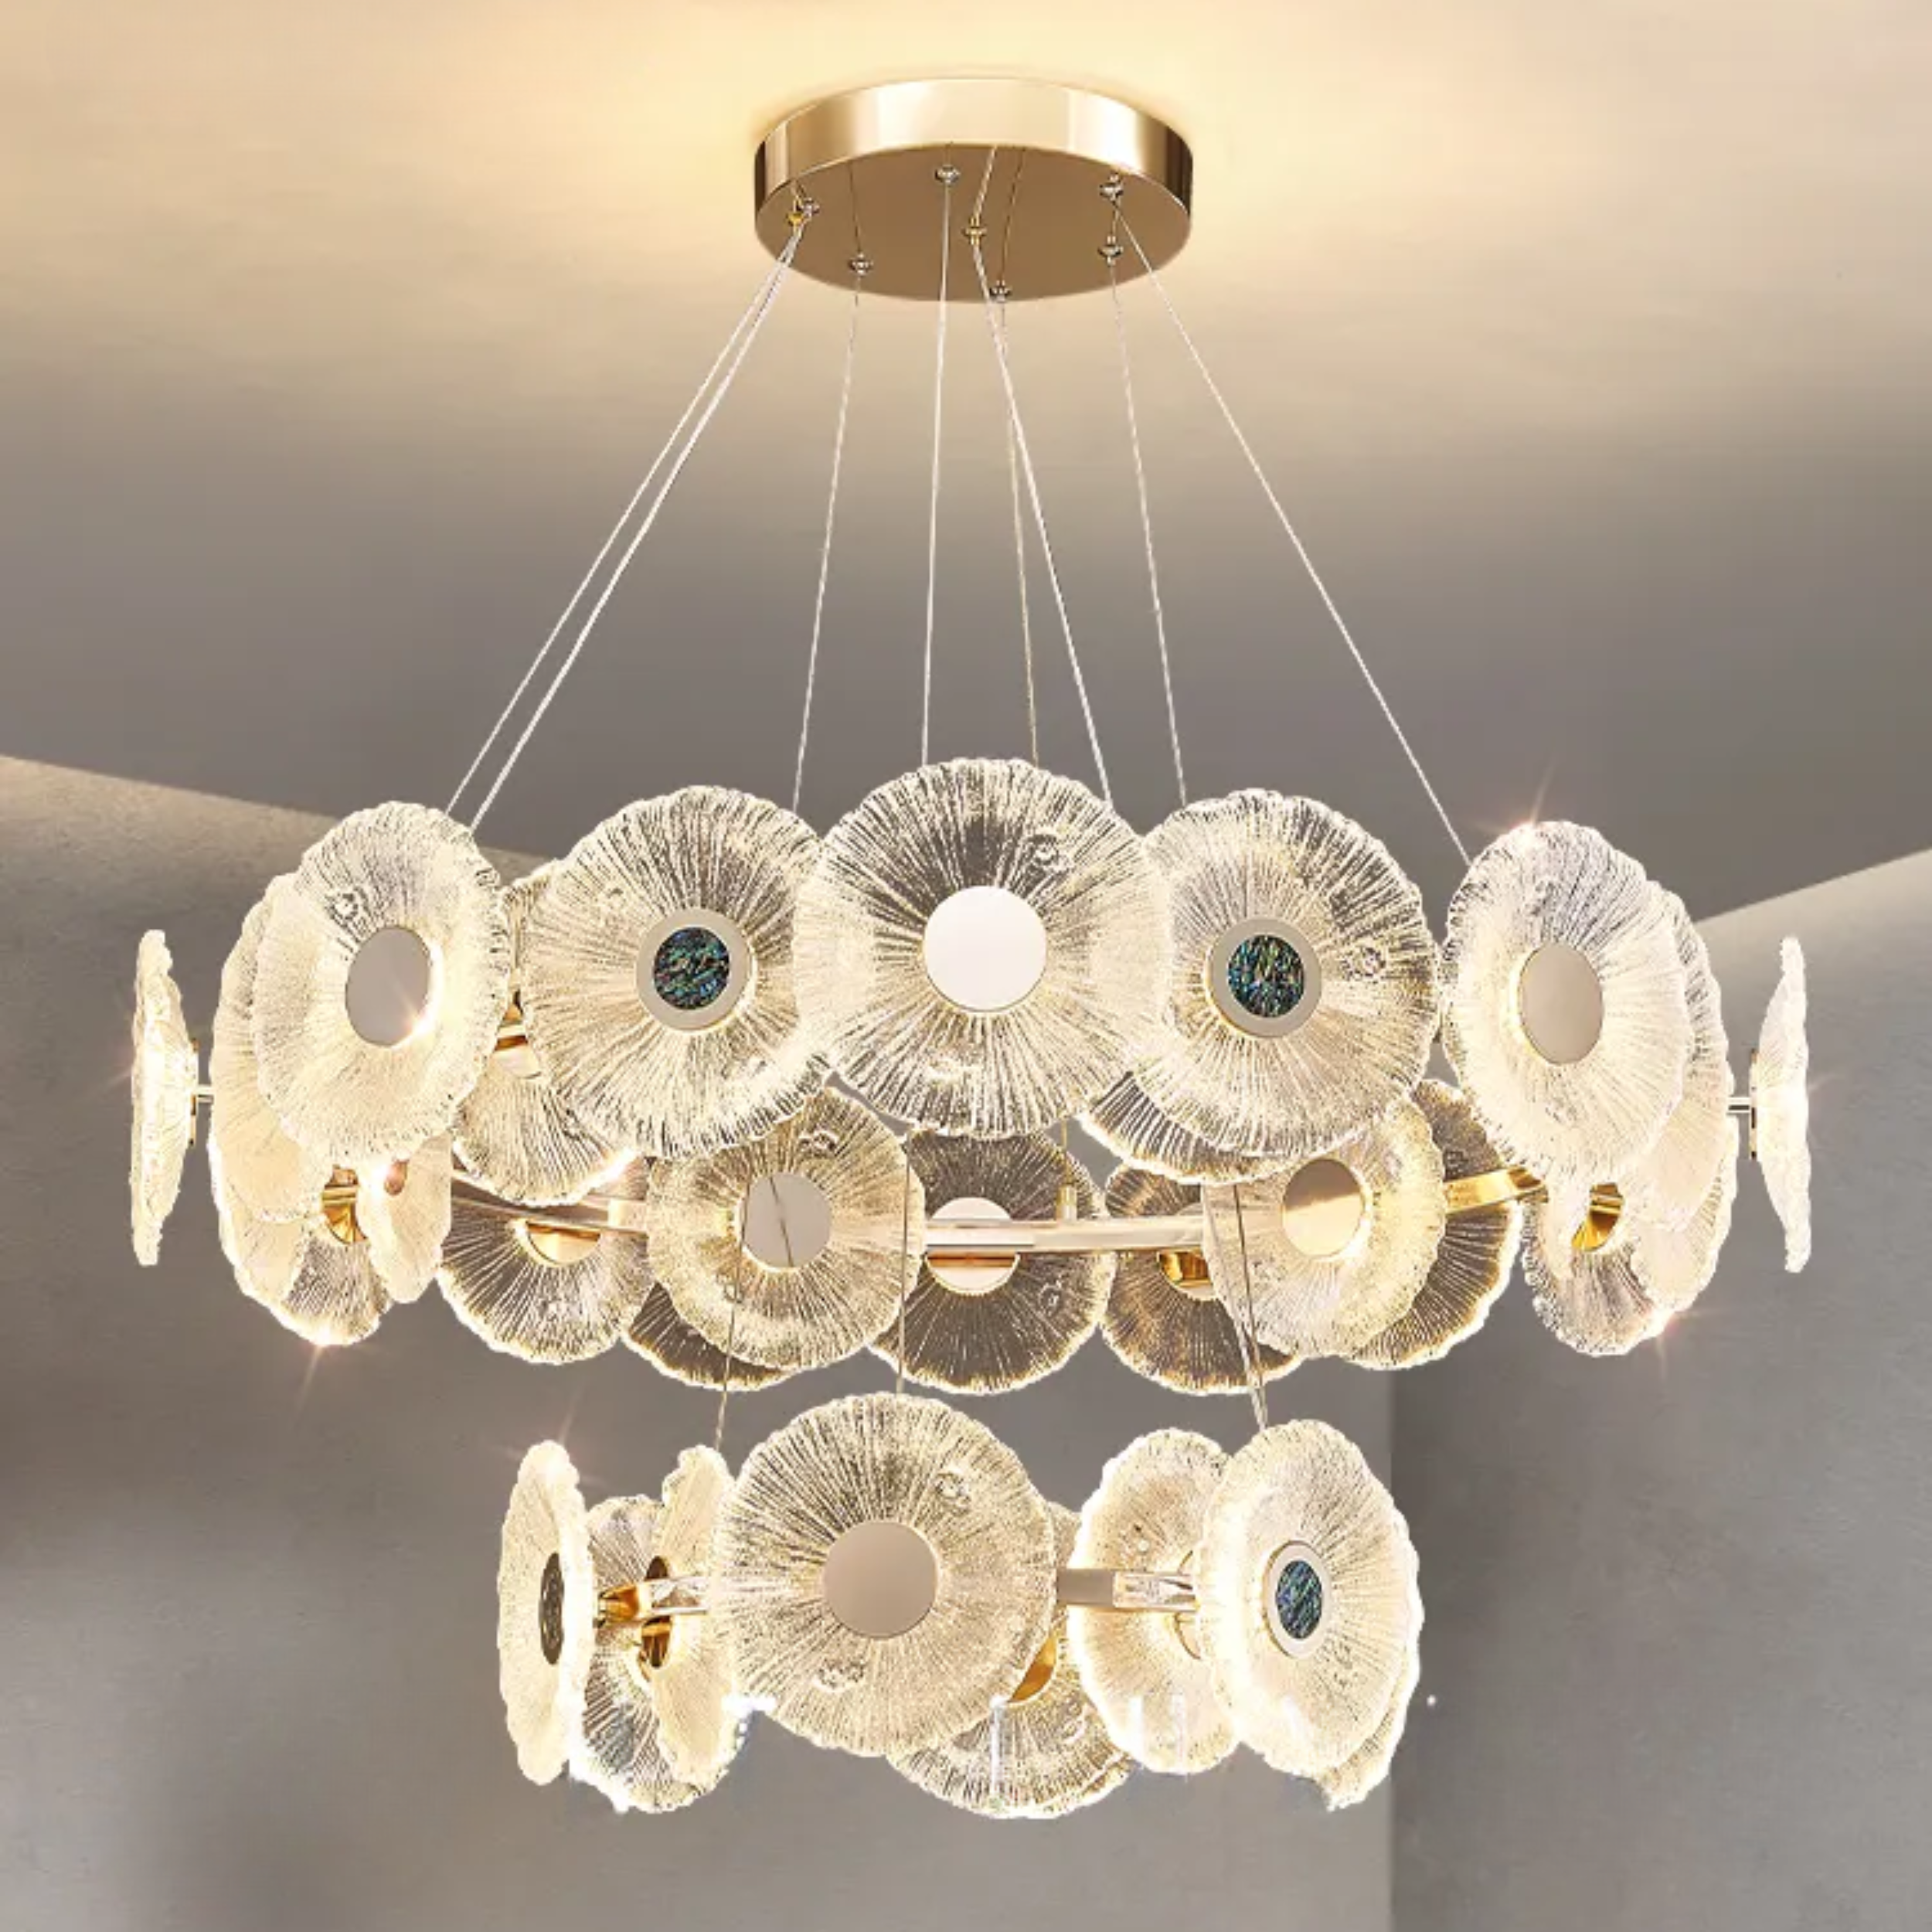 AM229-33 Premium Design Iron Frosted Glass In Built LED Chandelier